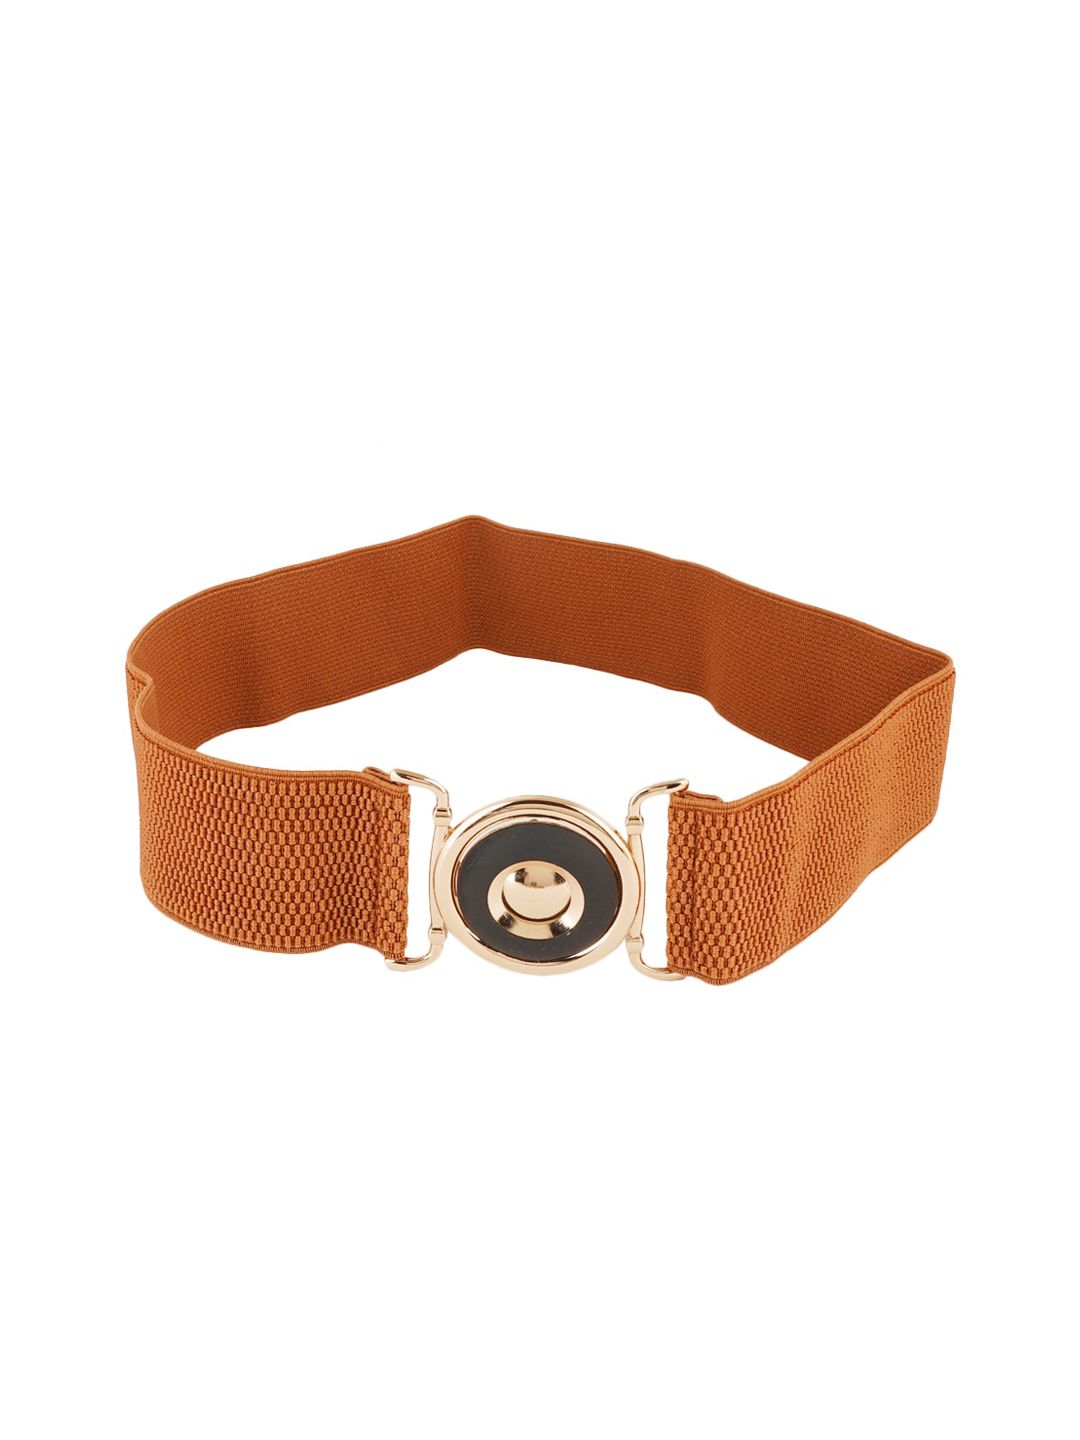 Style Shoes Women Tan Belt Price in India